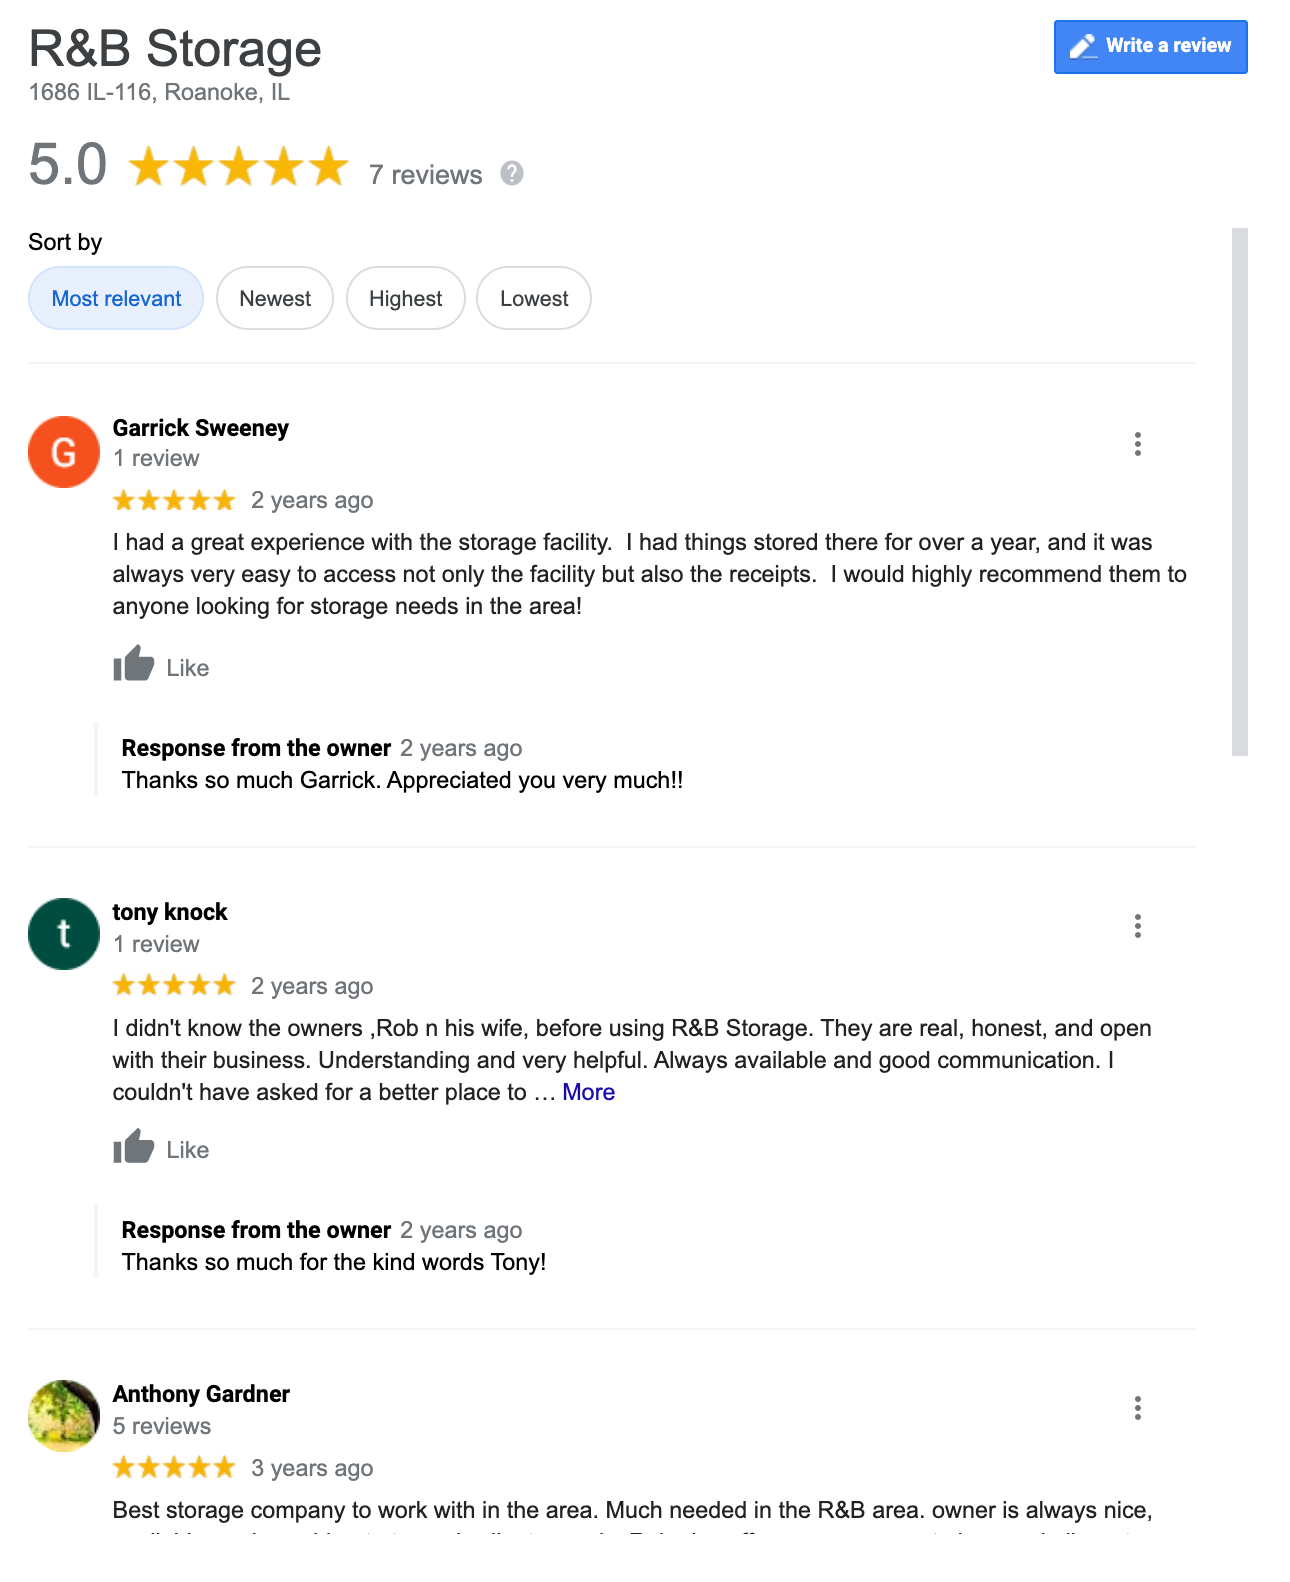 Customer reviews are important